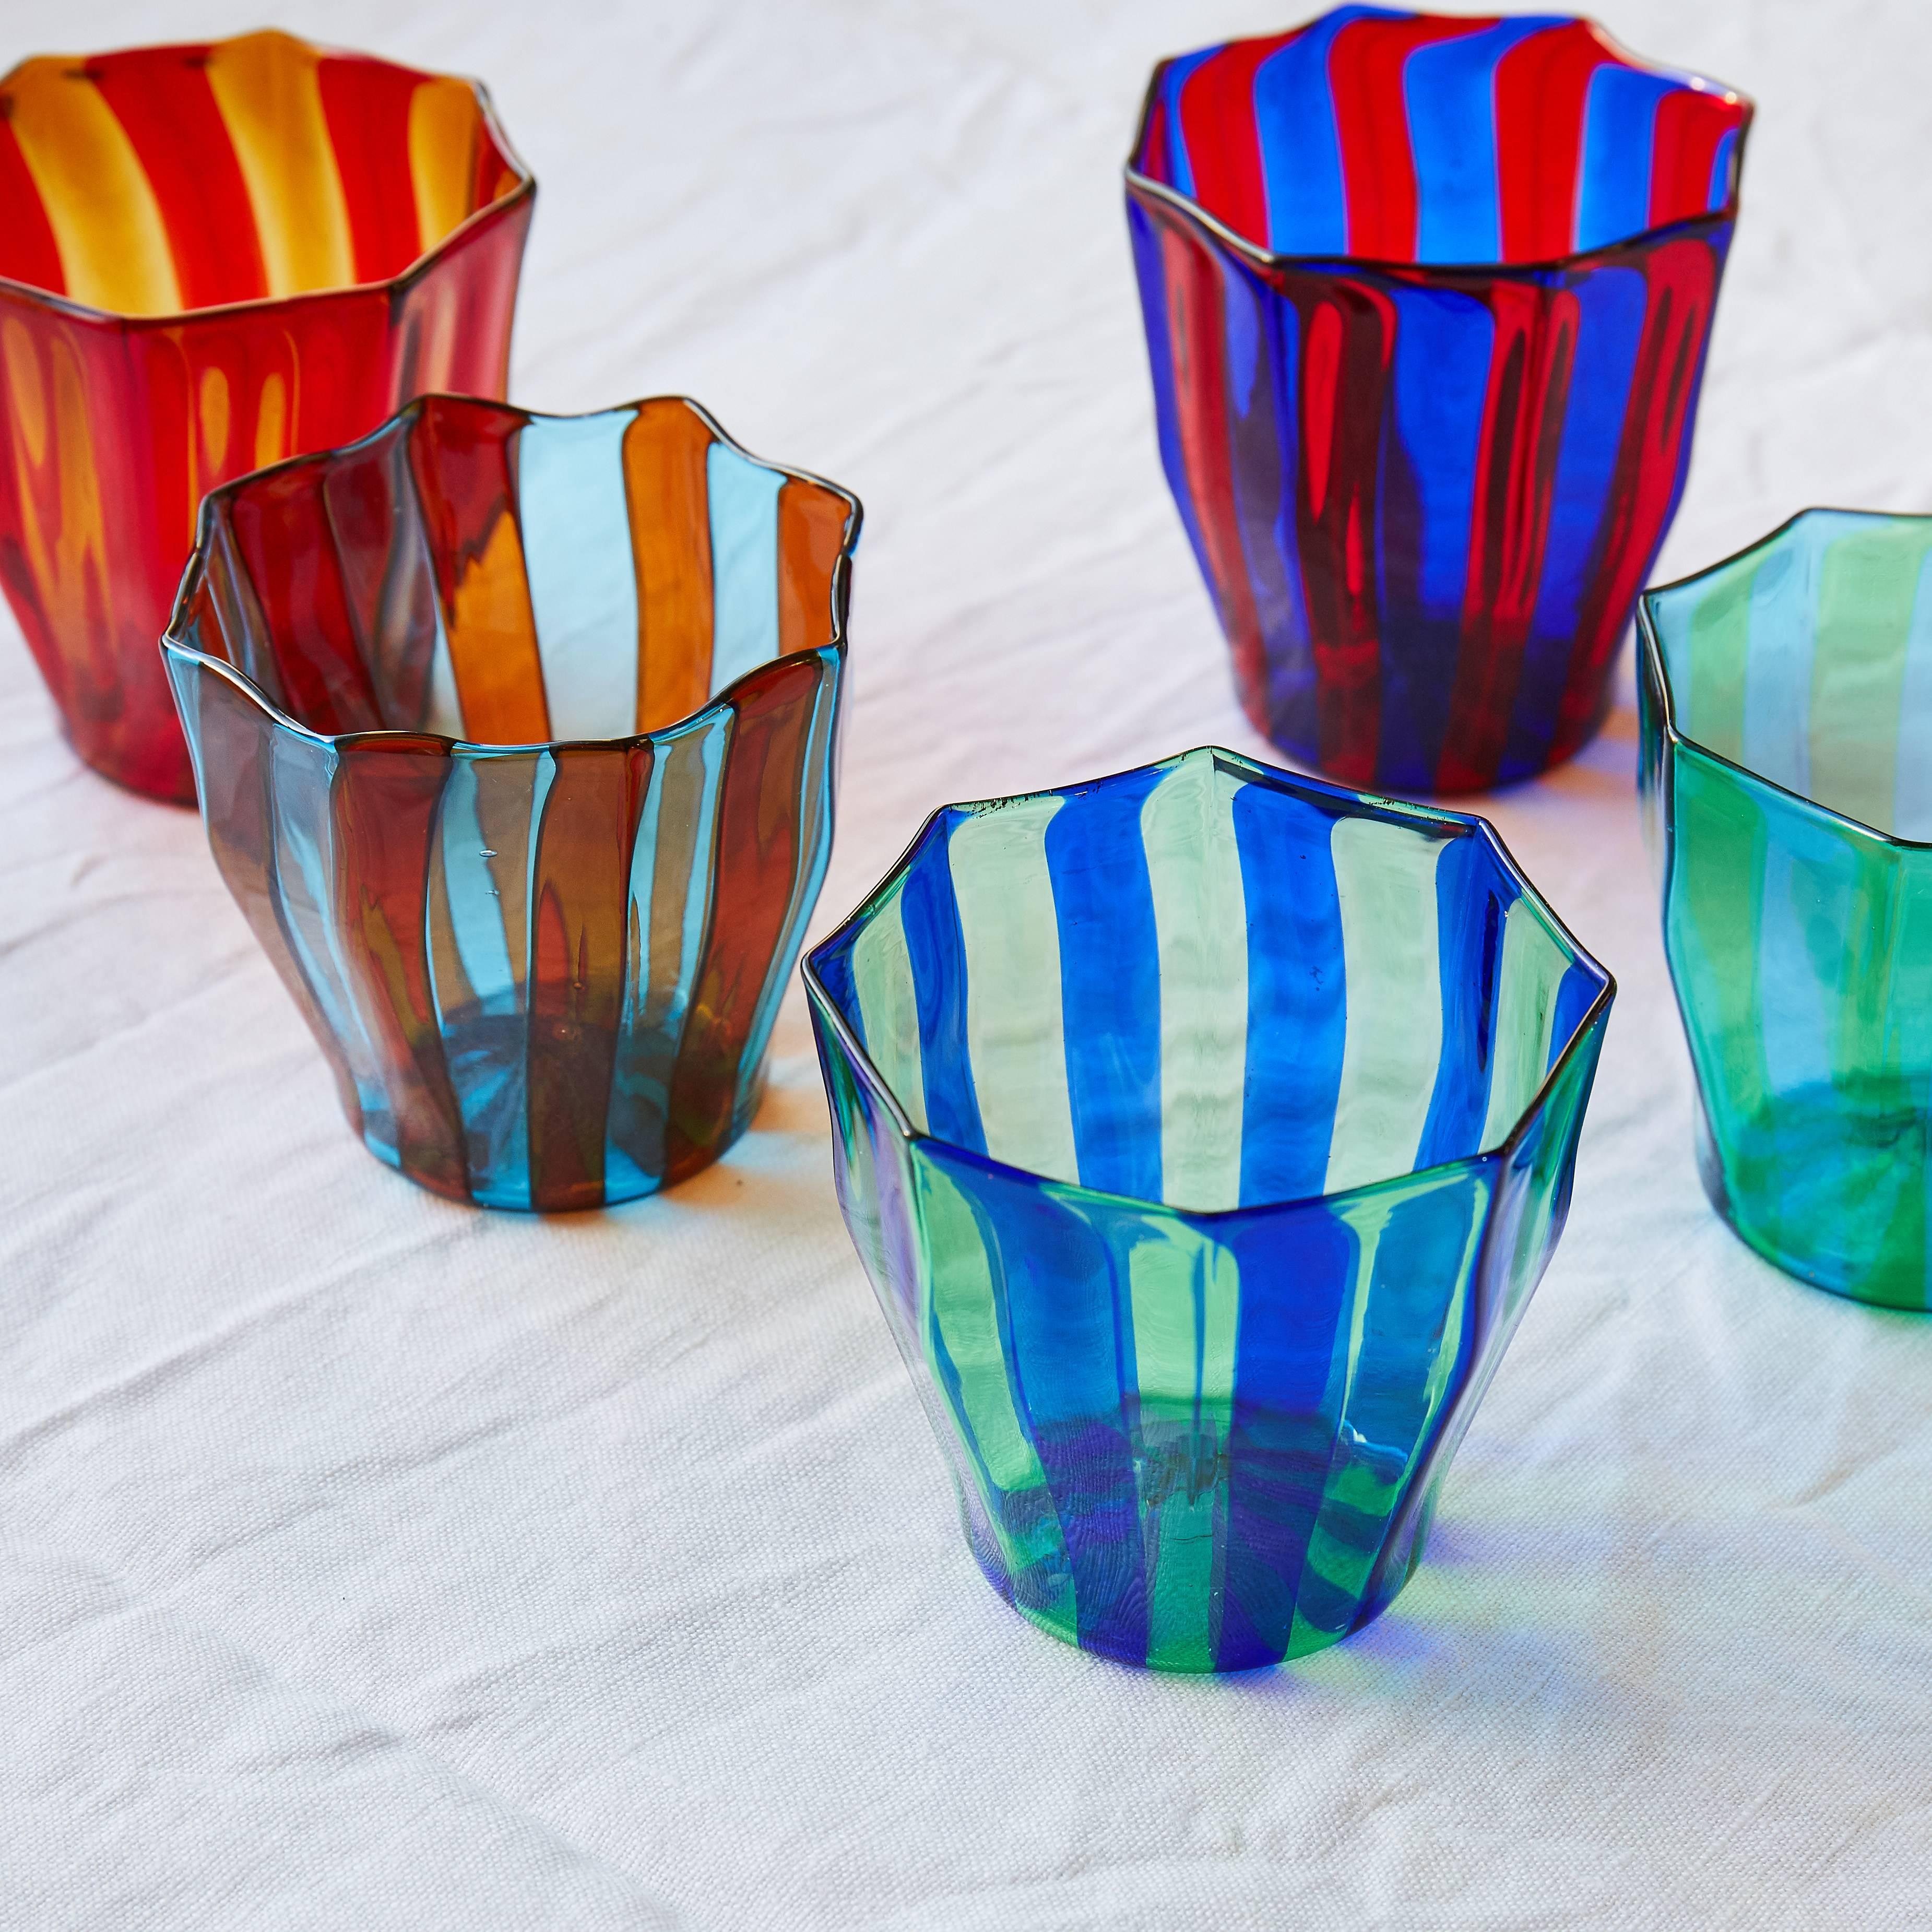 Campbell-Rey Octagonal Striped Tumbler in Amber and Turquoise Murano Glass 1